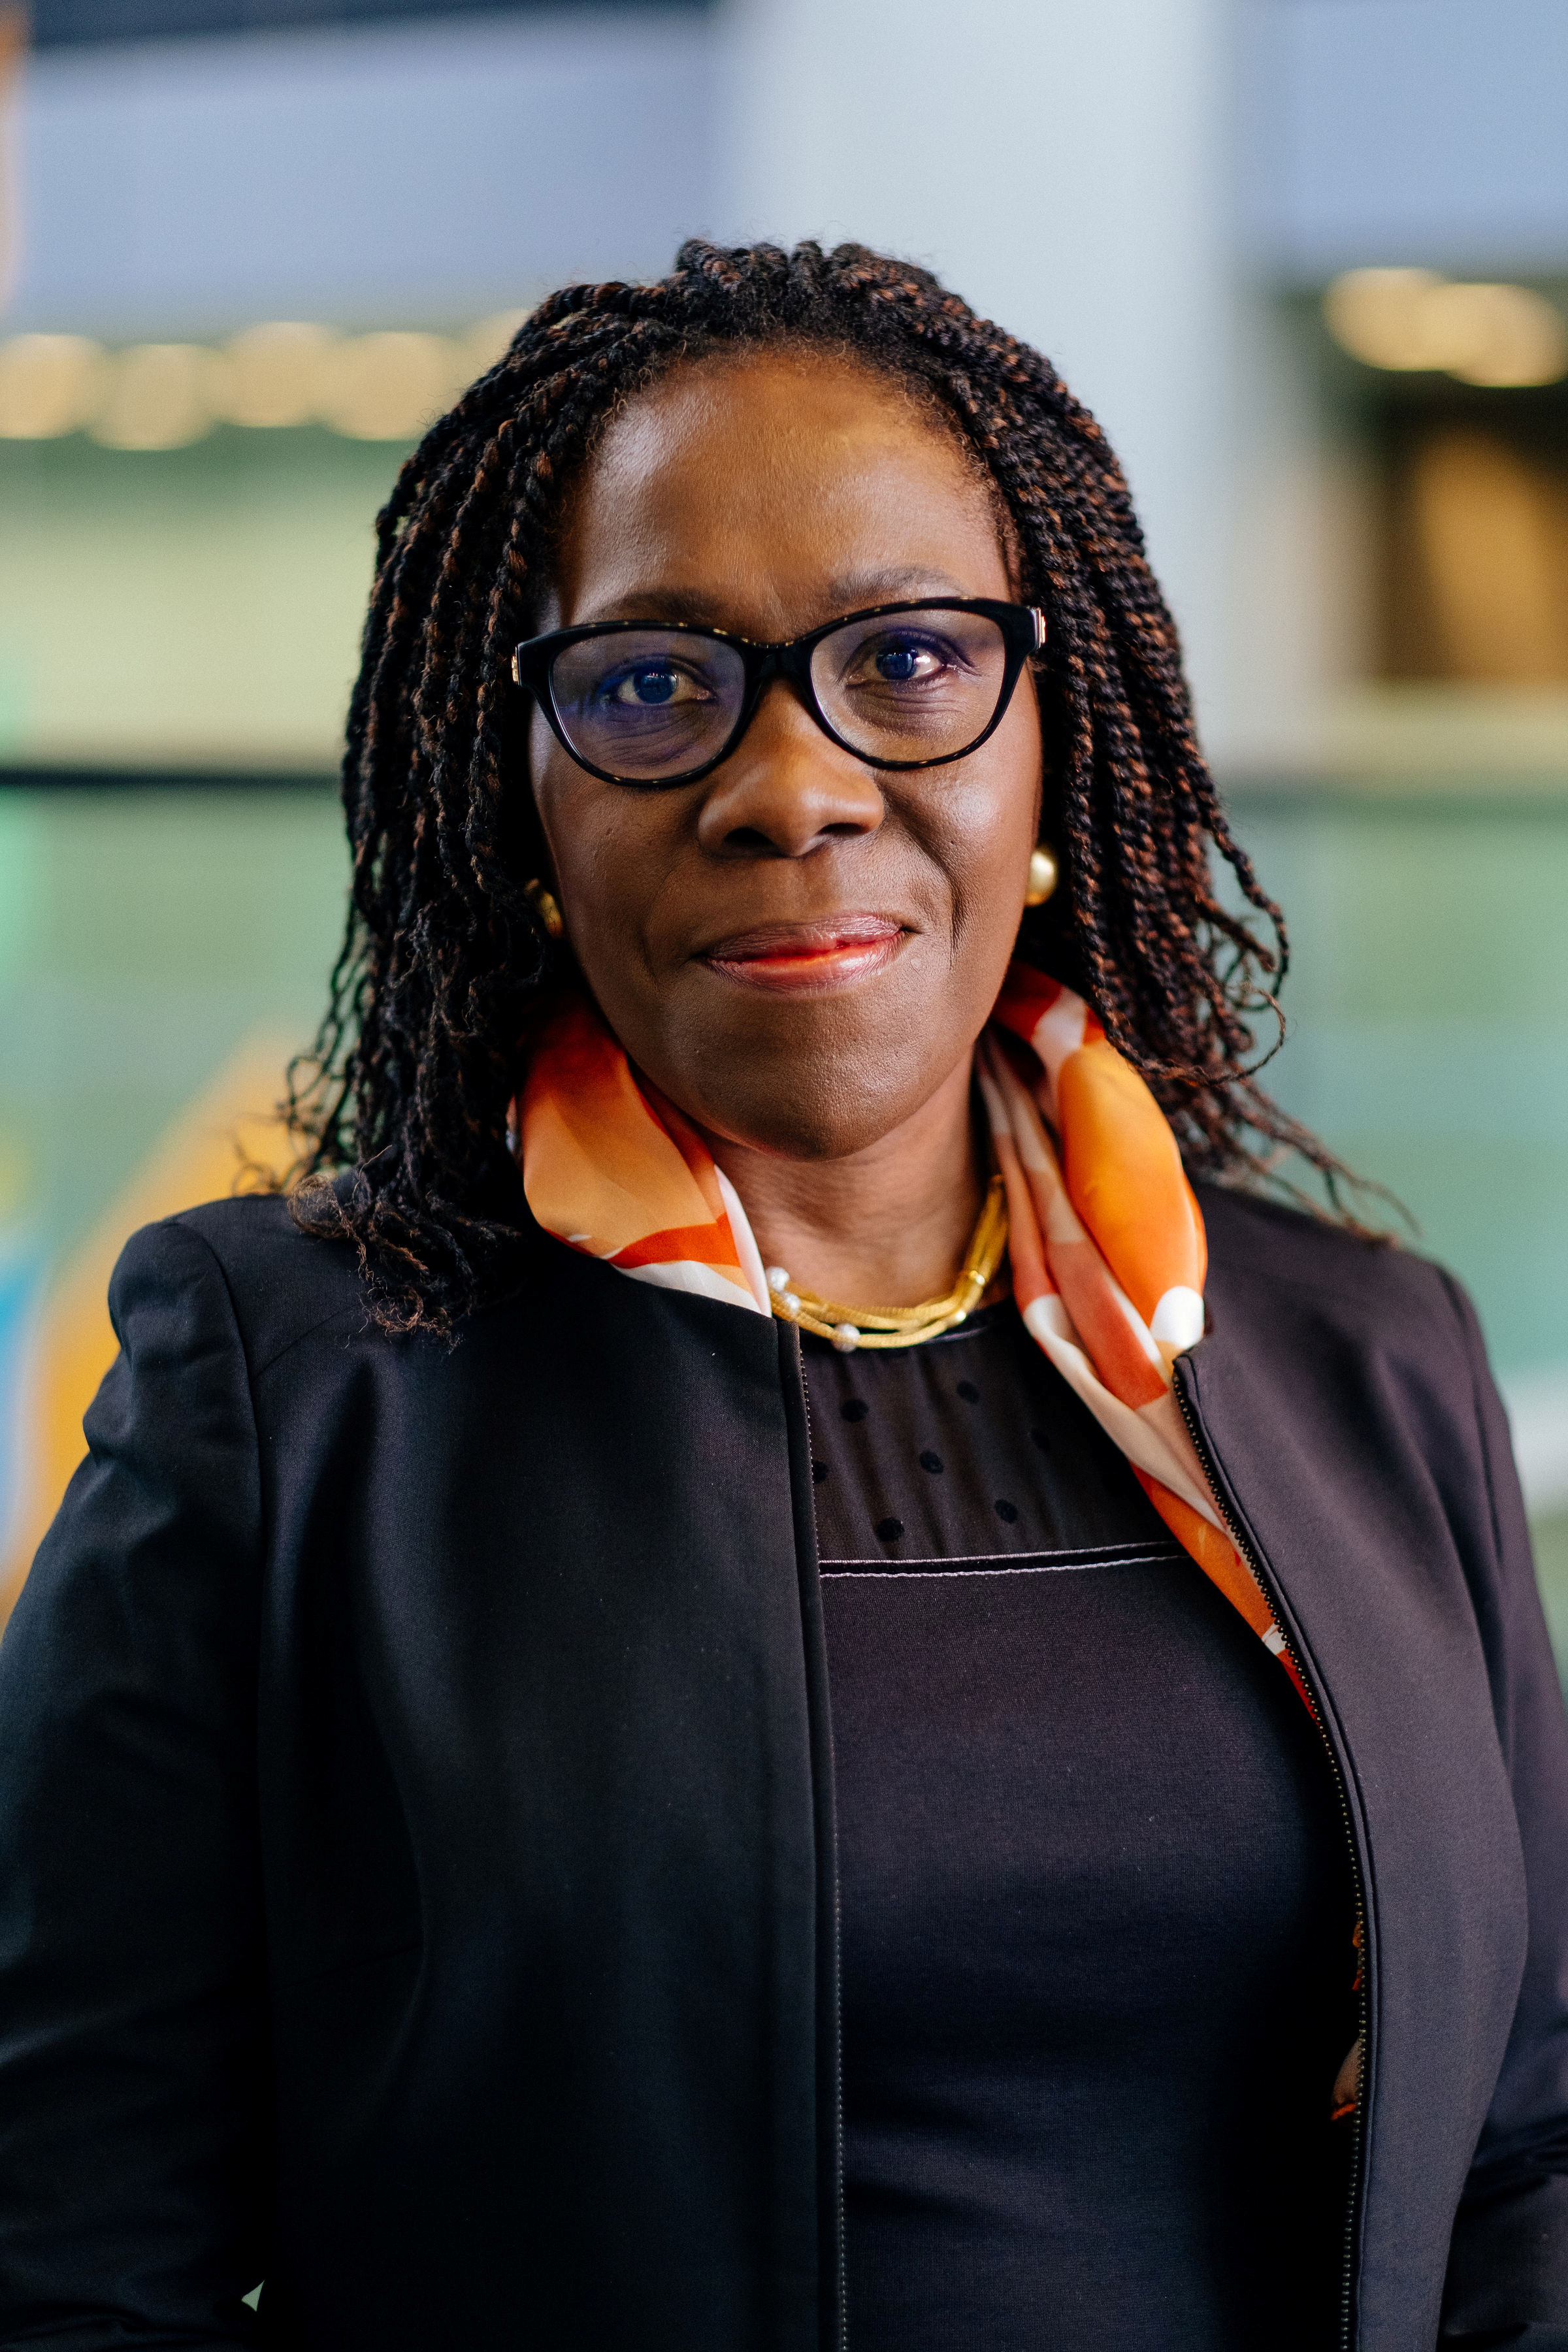 Ireti Samuel-Ogbu, Managing Director and Citi's Country Officer for Nigeria and Ghana, poses in this handout picture taken on 2019. CITI/Handout via REUTERS